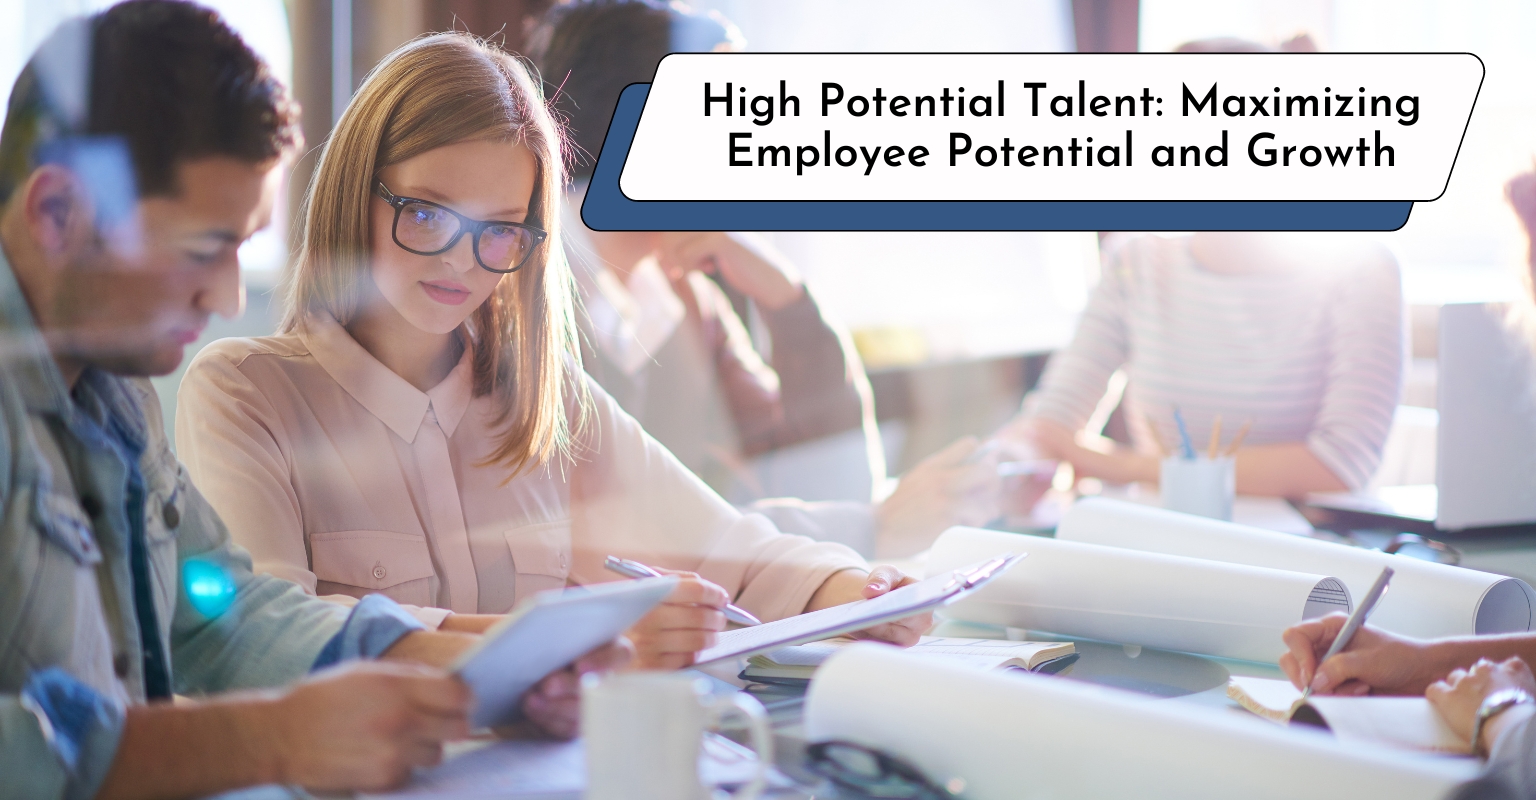 High Potential Talent: Maximizing Employee Potential and Growth